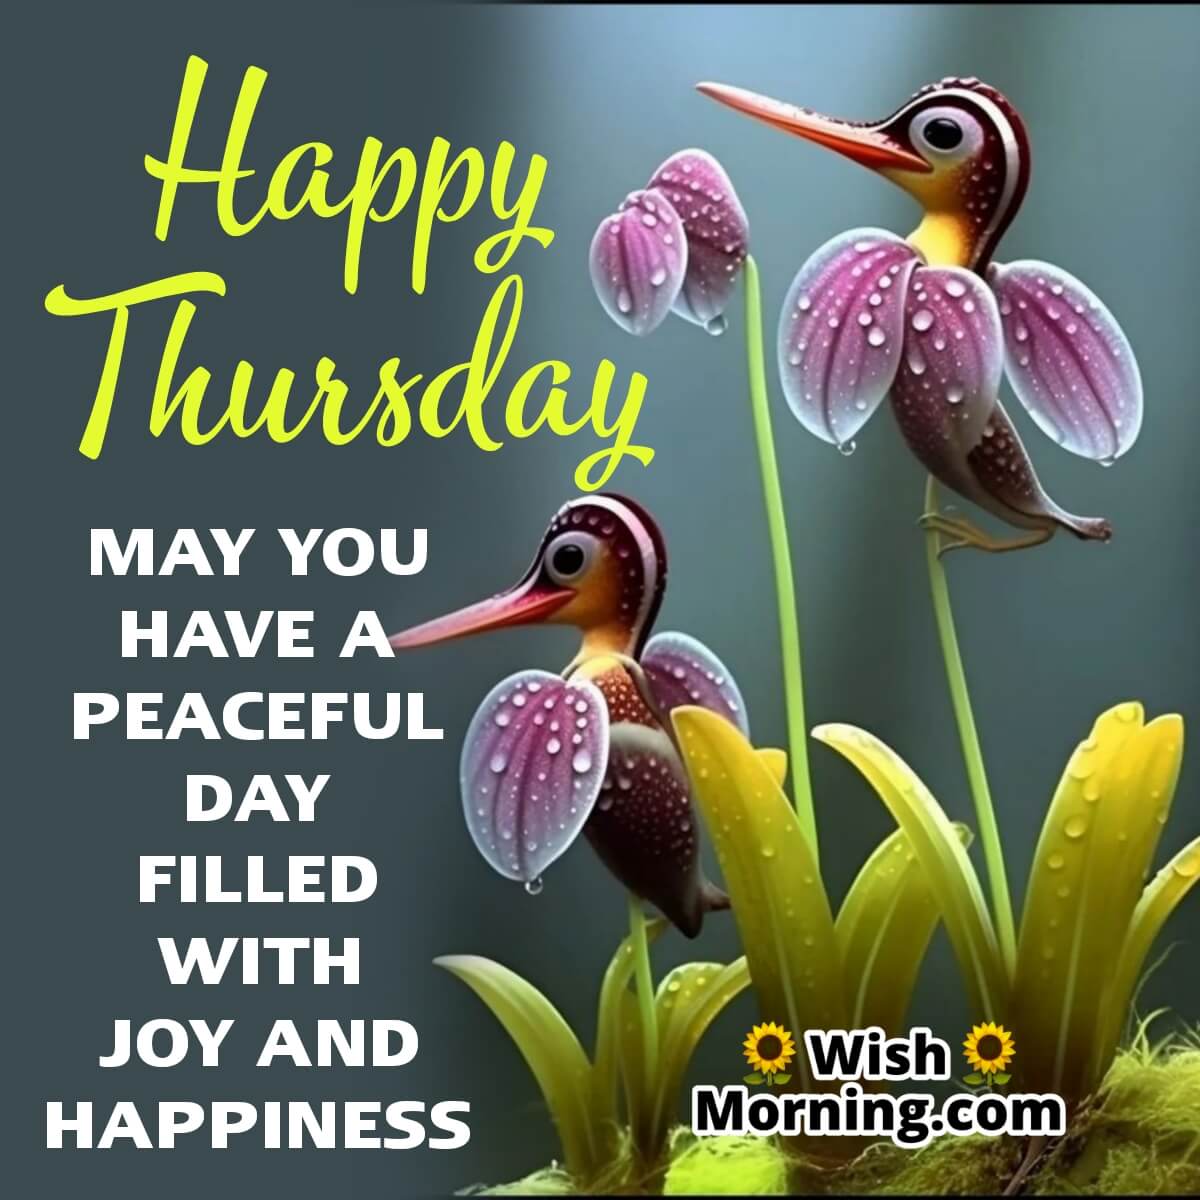 Happy Thursday Peaceful Wishes